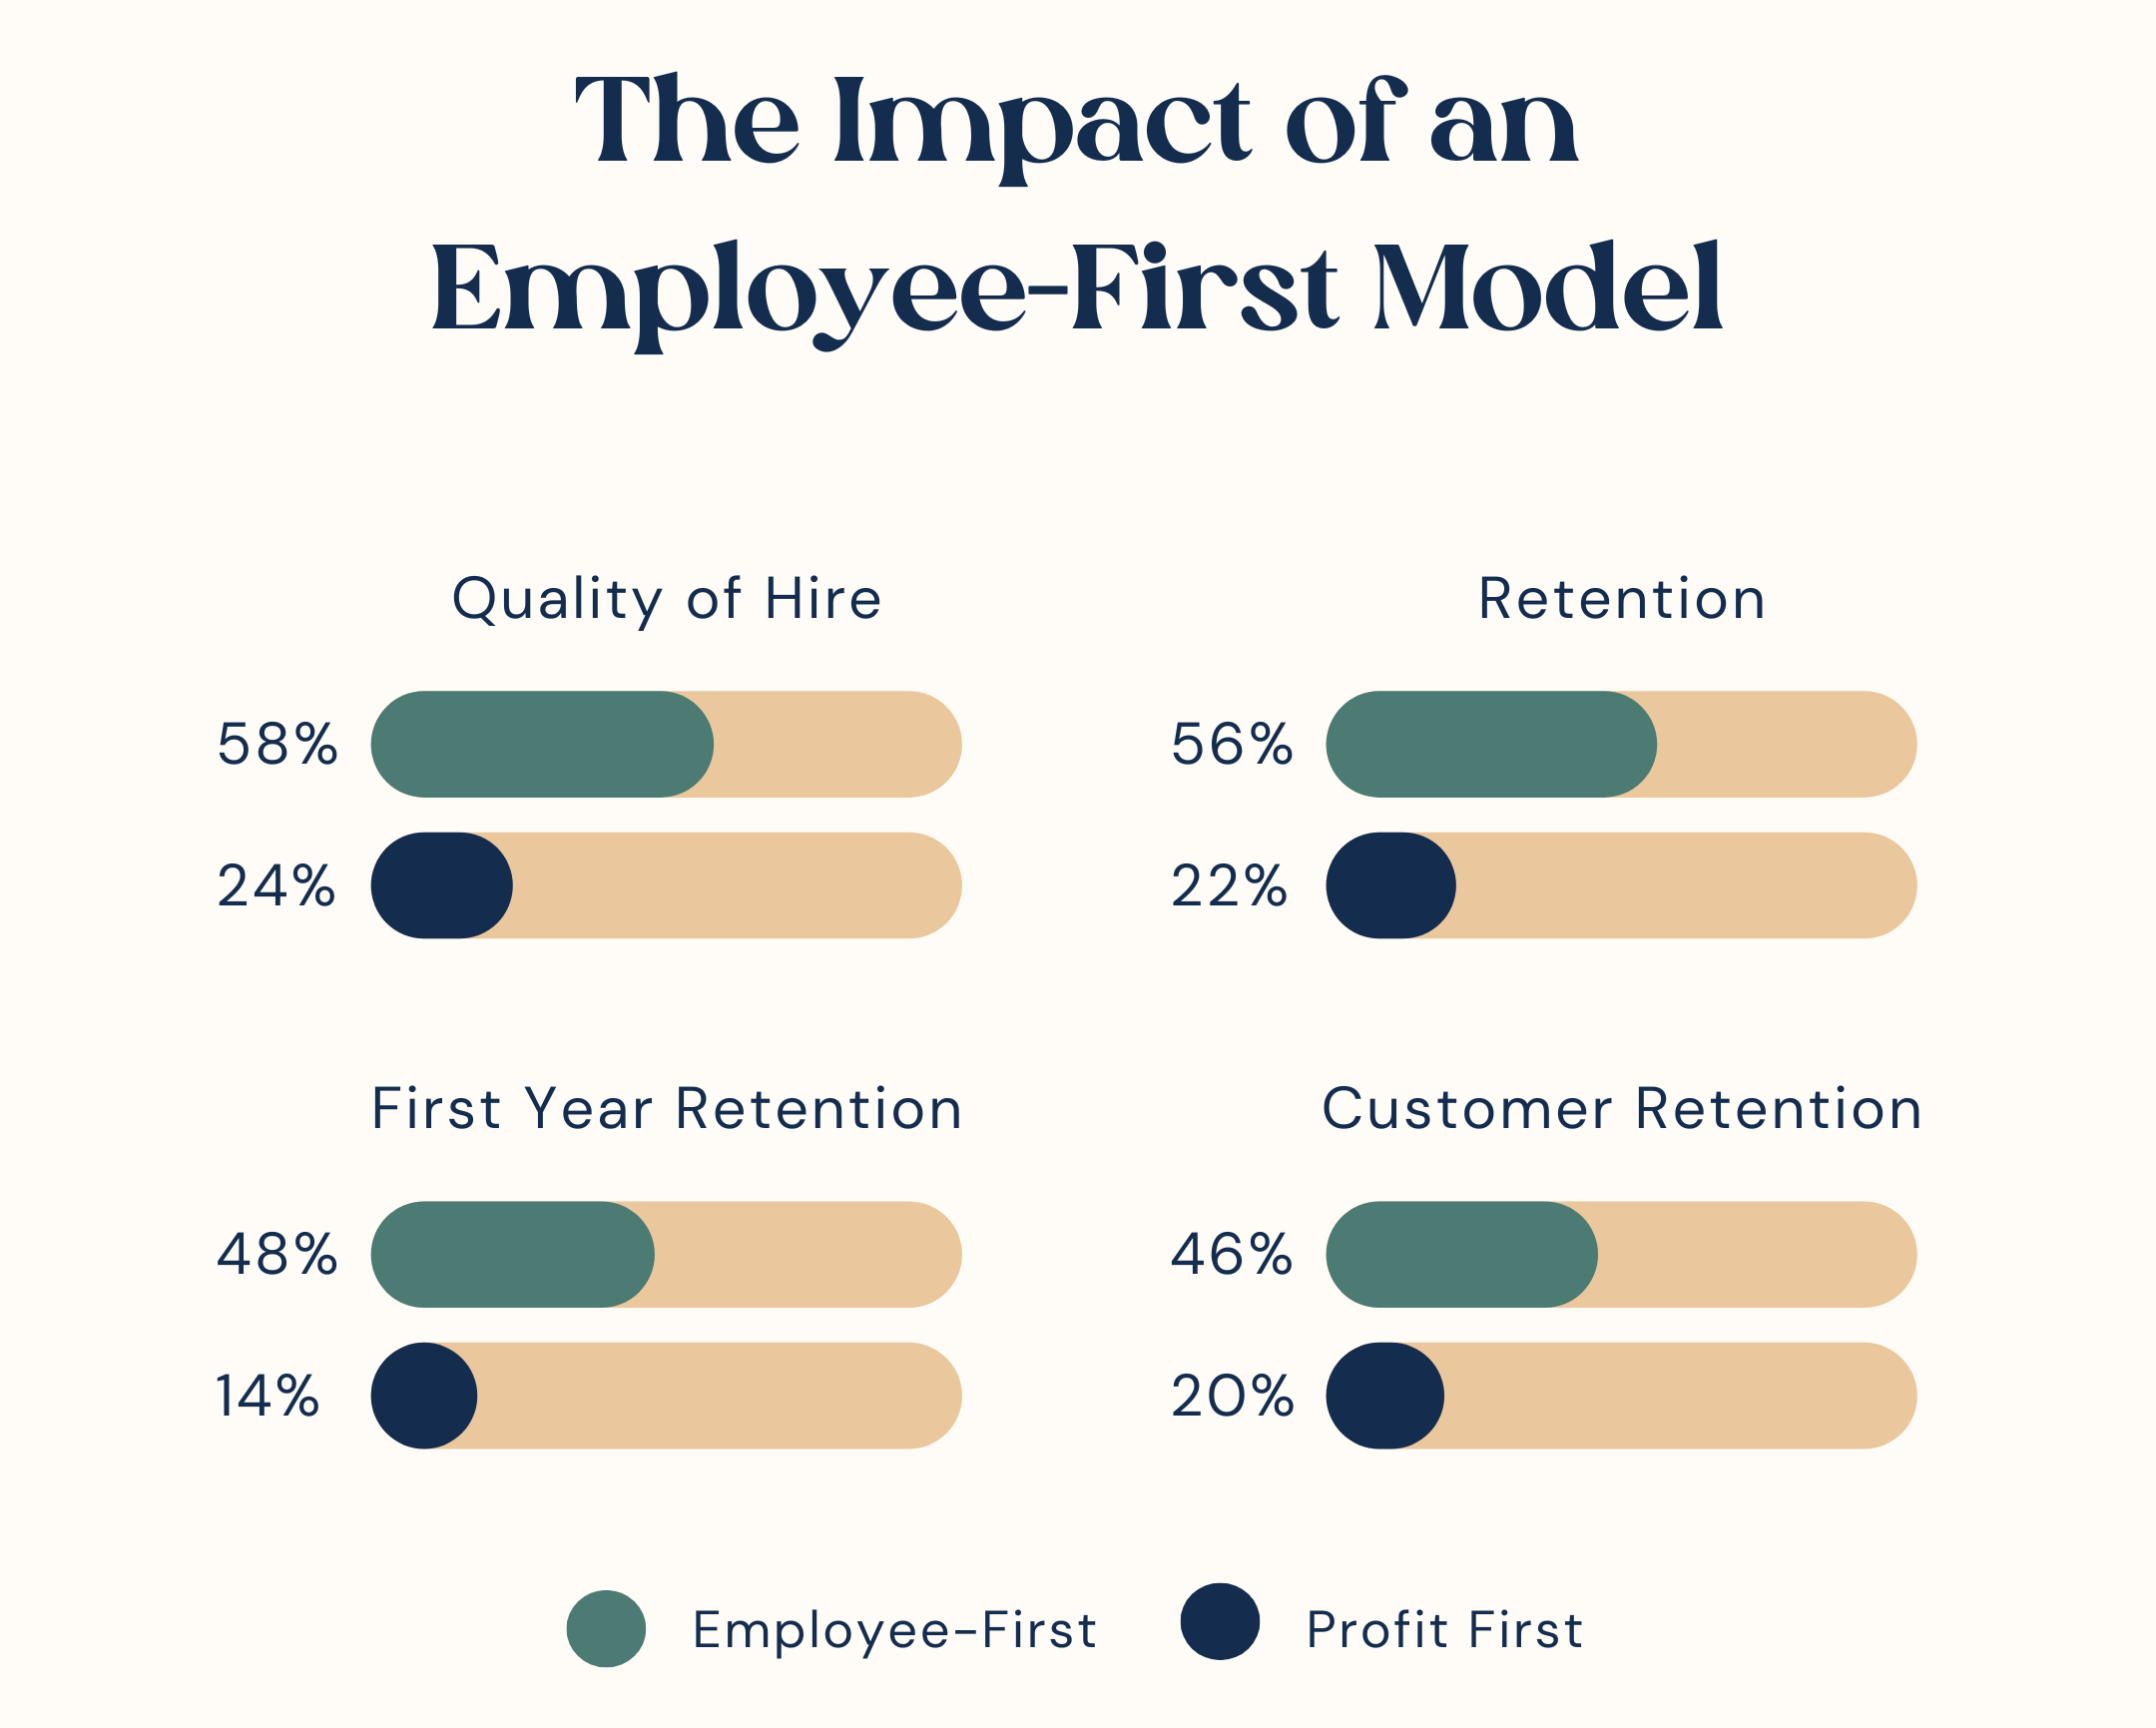 The Impact of an Employee-First Model. Quality of Hire: 58% for Employee-First and 24% for Profit First. Retention 56% for Employee-First and 22% for Profit First. First Year Retention 48% for Employee-First and 14% for Profit First. Customer Retention 46% for Employee-First and 20% for Profit First. 